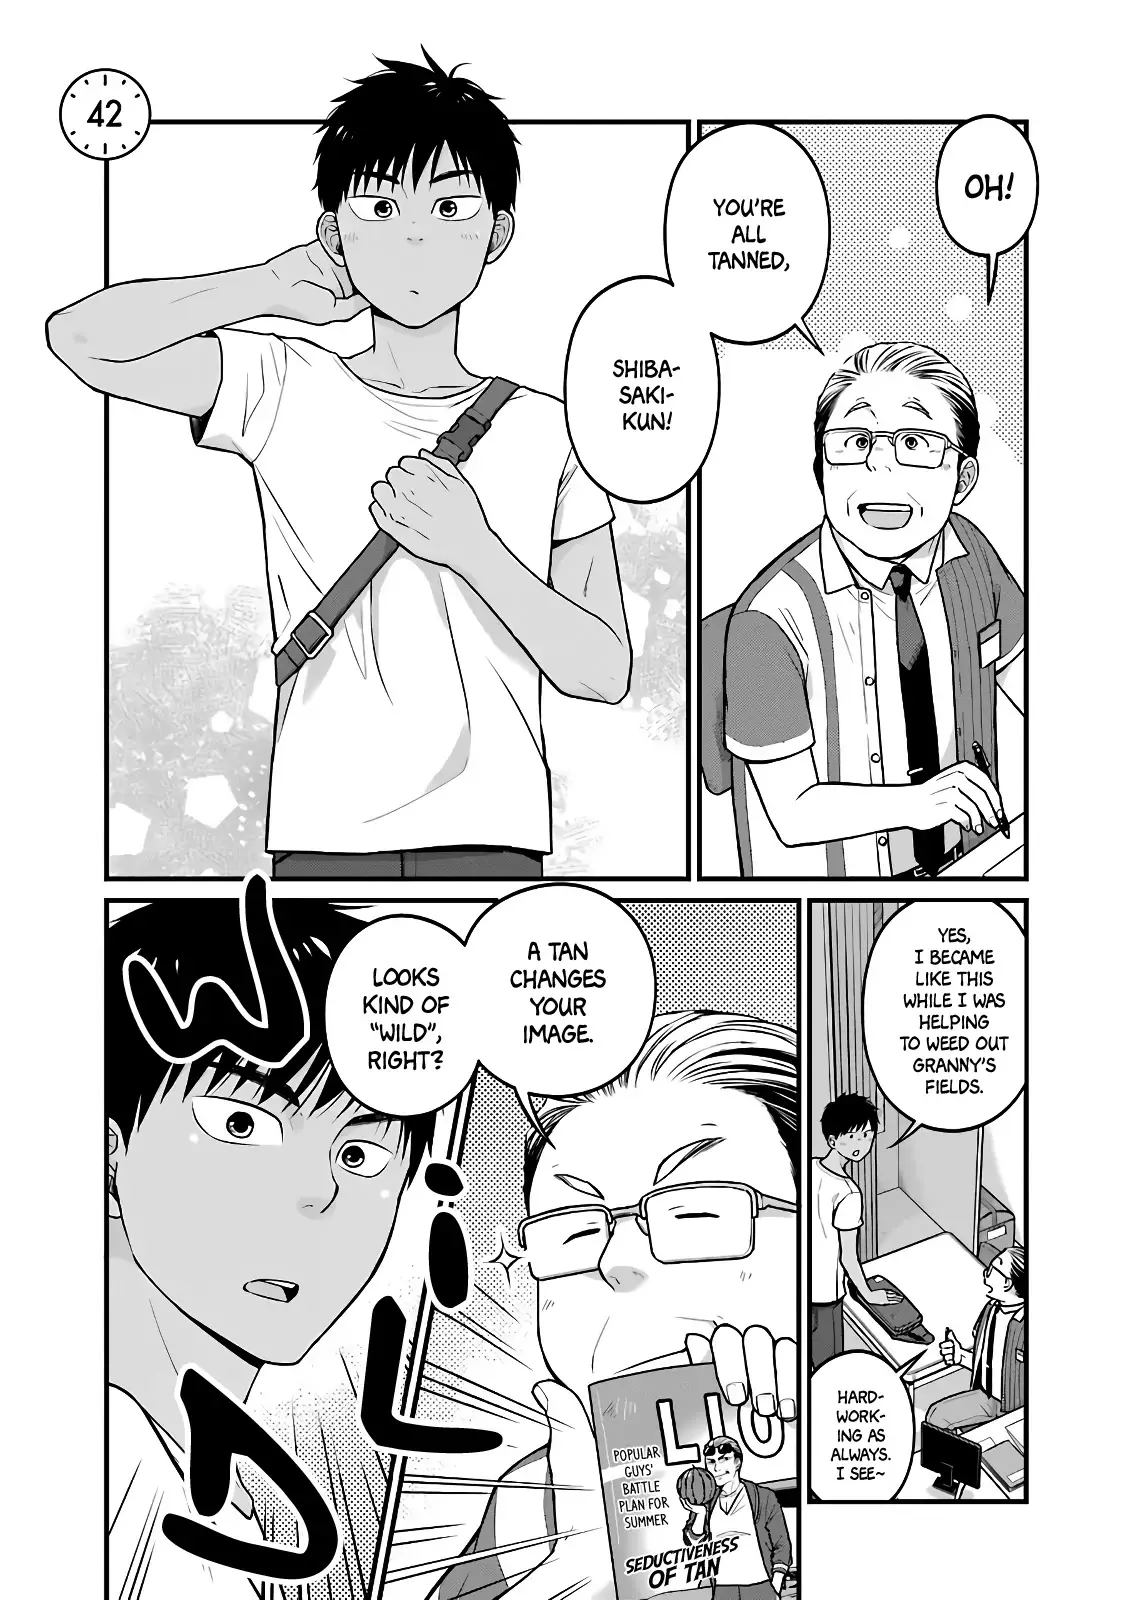 5 Minutes With You At A Convenience Store - 42 page 1-1cb2aaeb